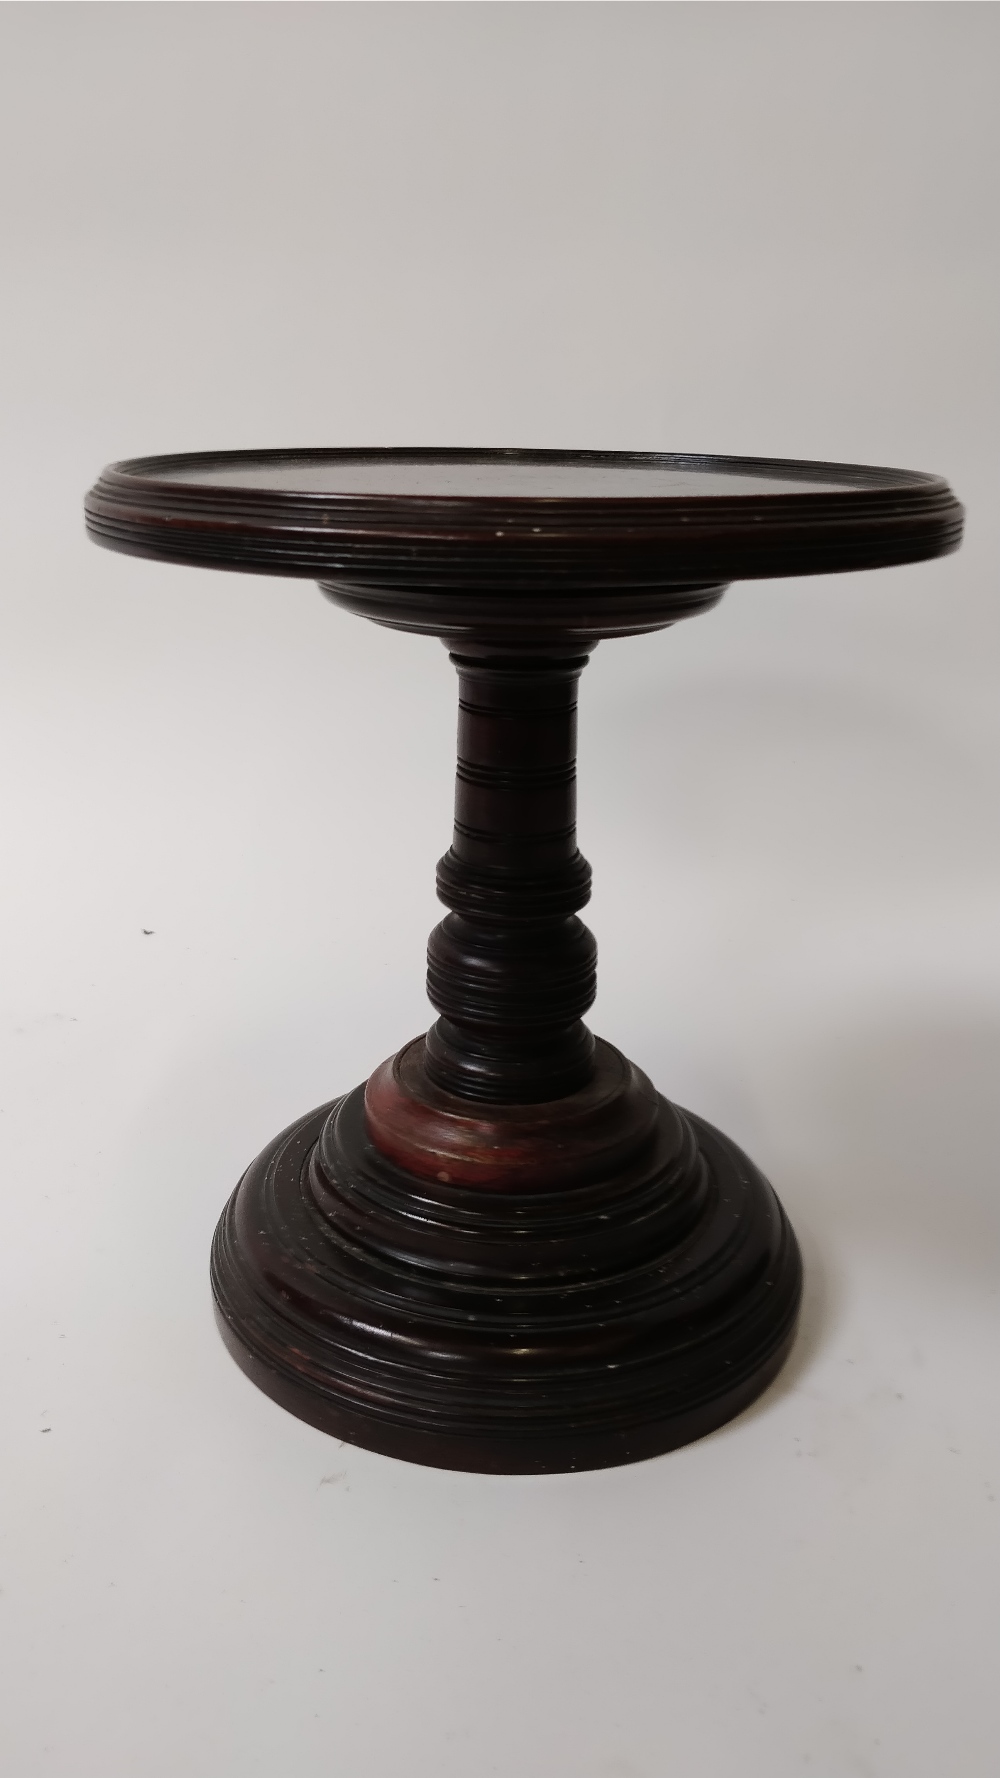 A Victorian mahogany adjustable table stand, with a turned stem and base, 32cm high